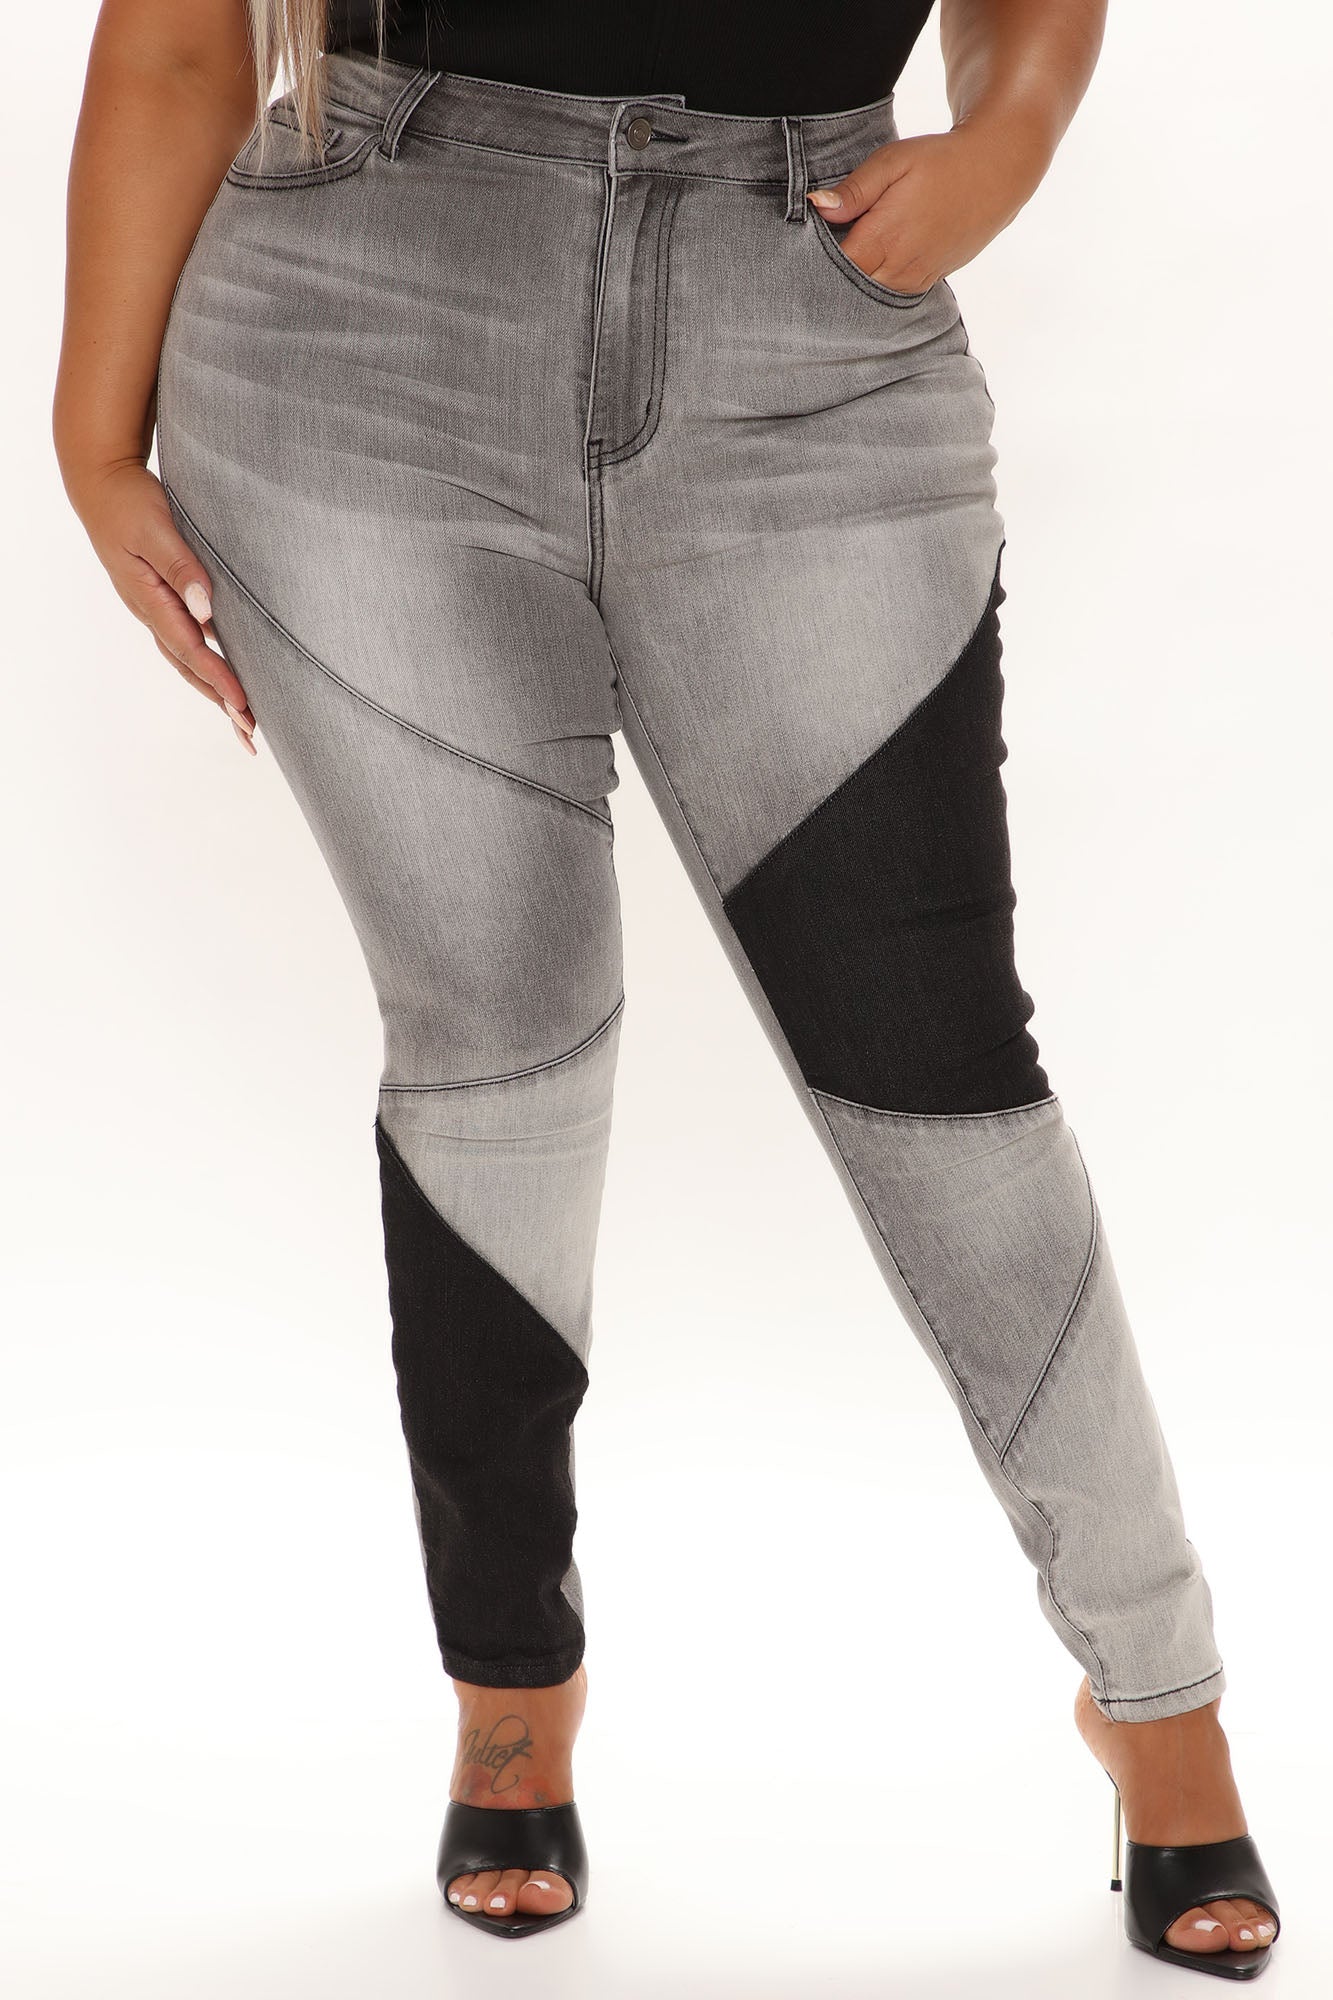 Stay In Line Mid Rise Skinny Jeans - Grey/Black